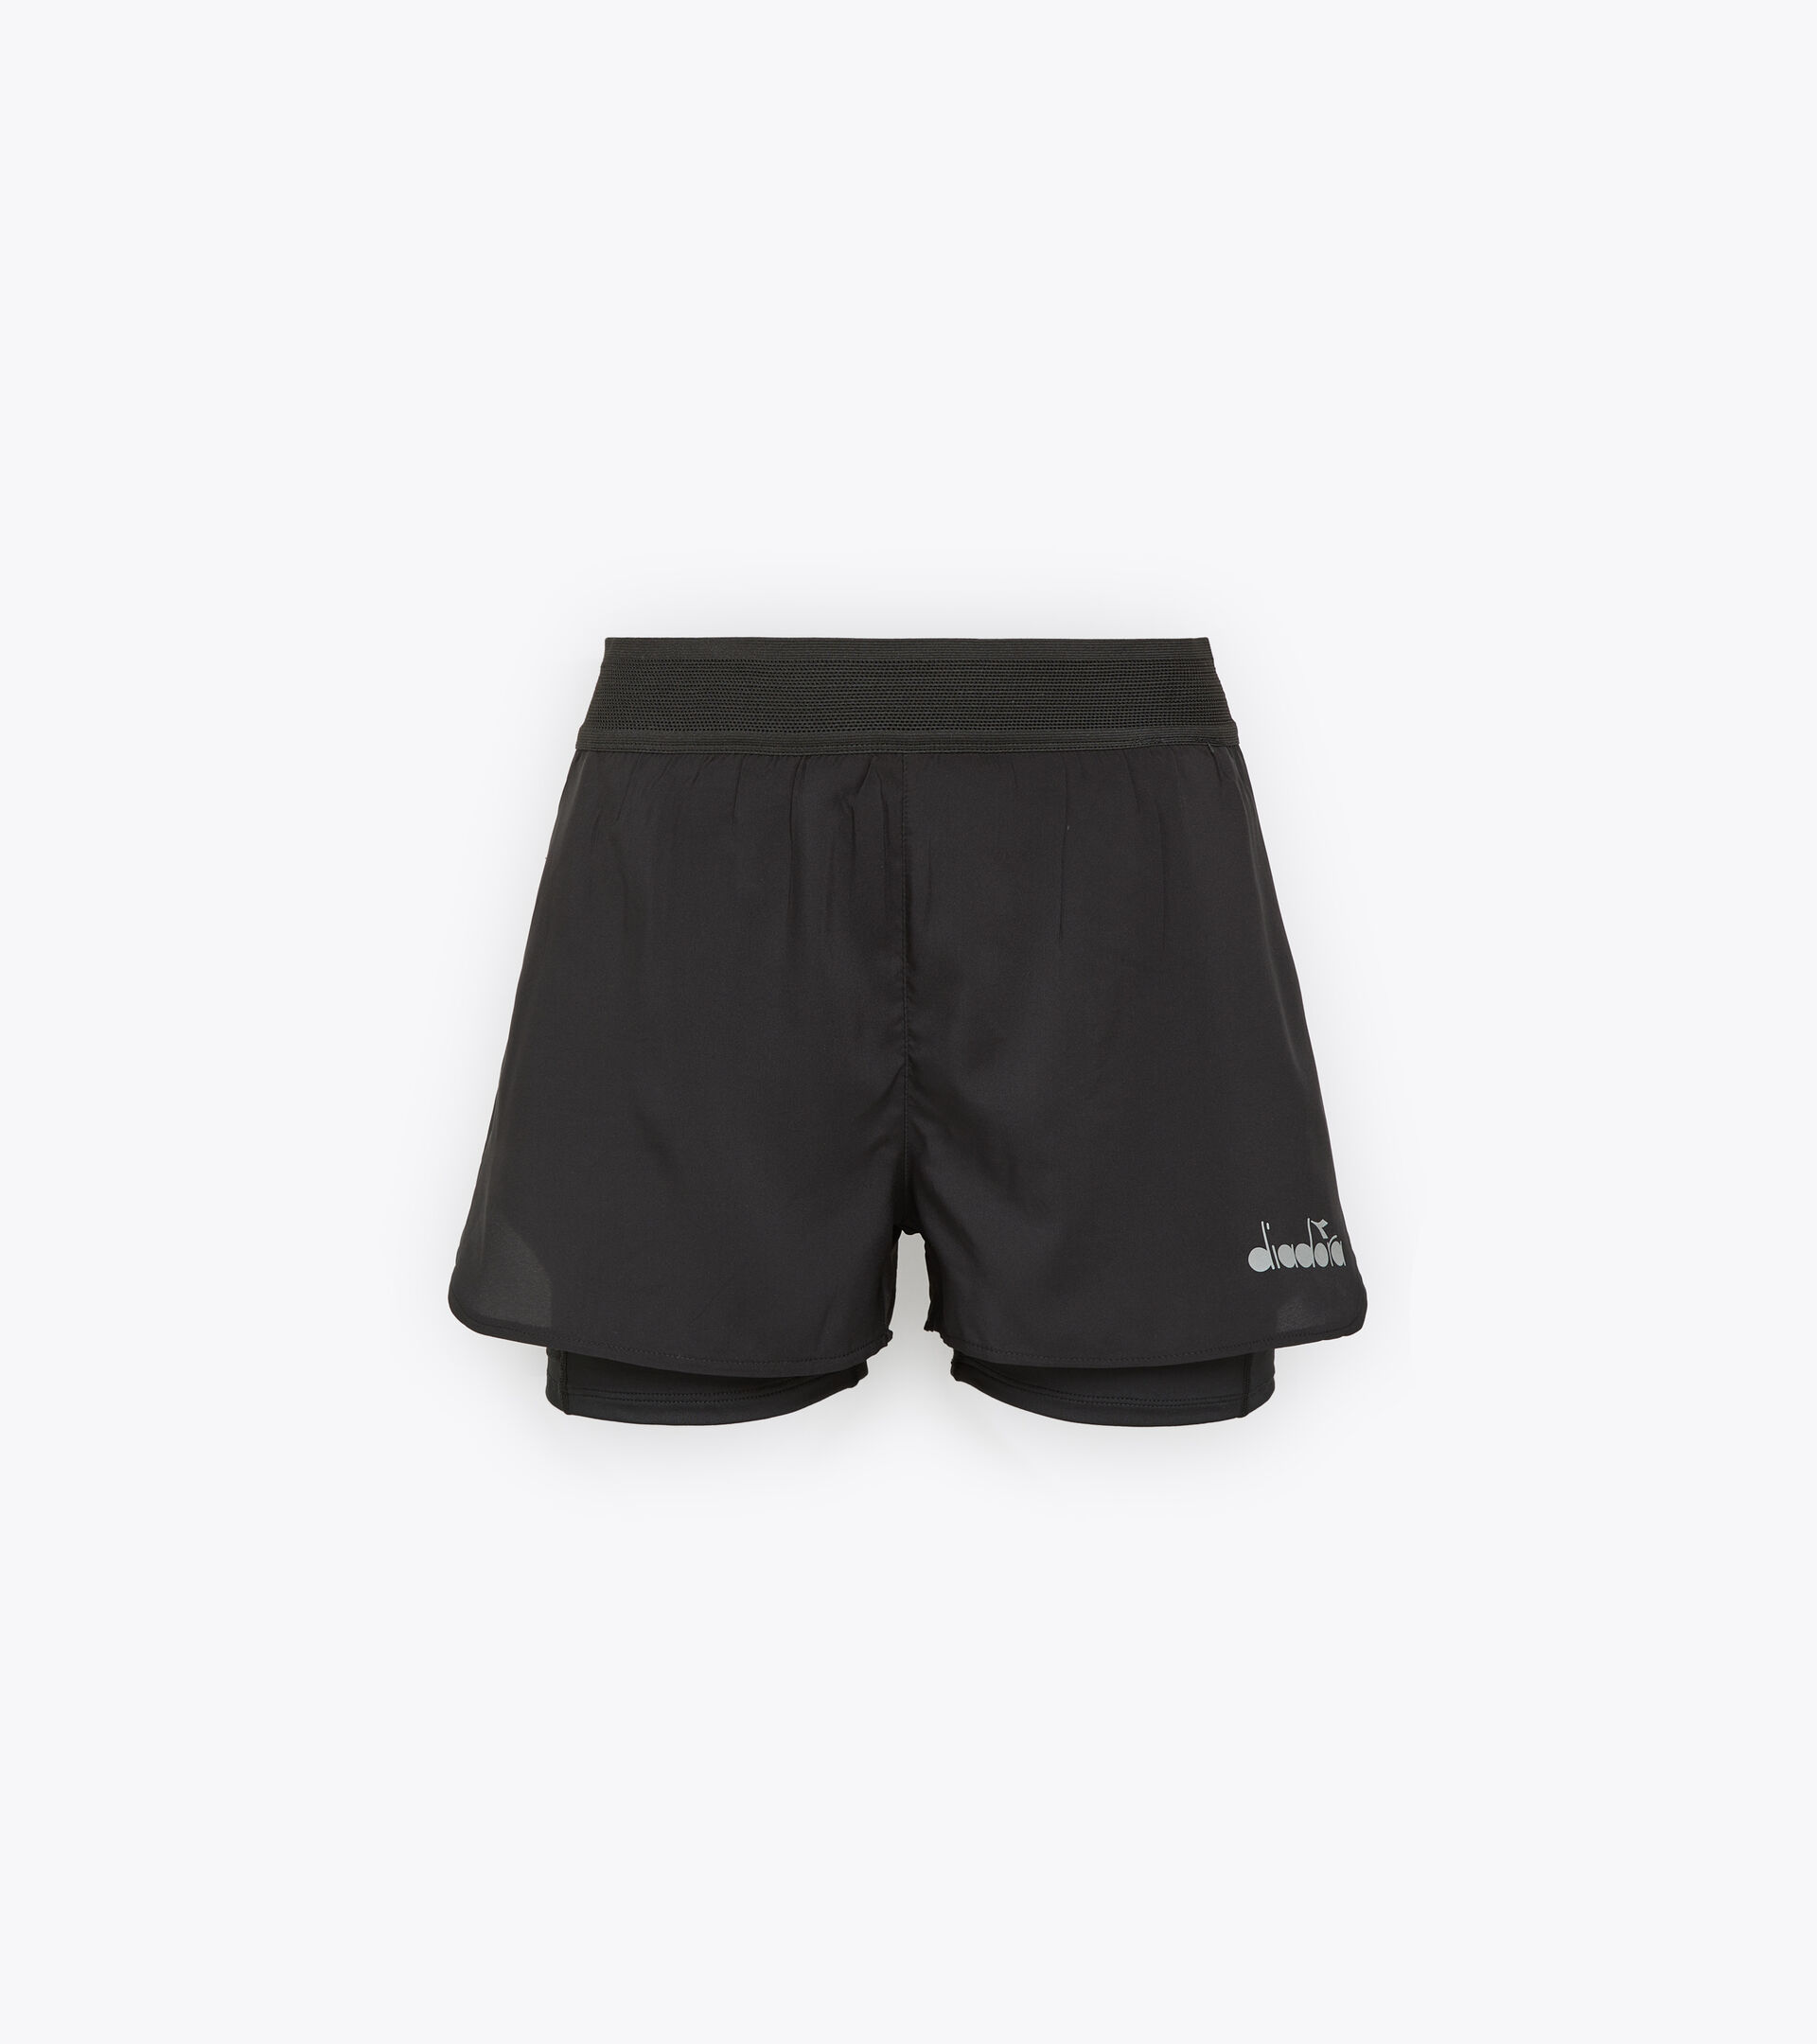 Women's Running Shorts, Double-Layered & Athletic